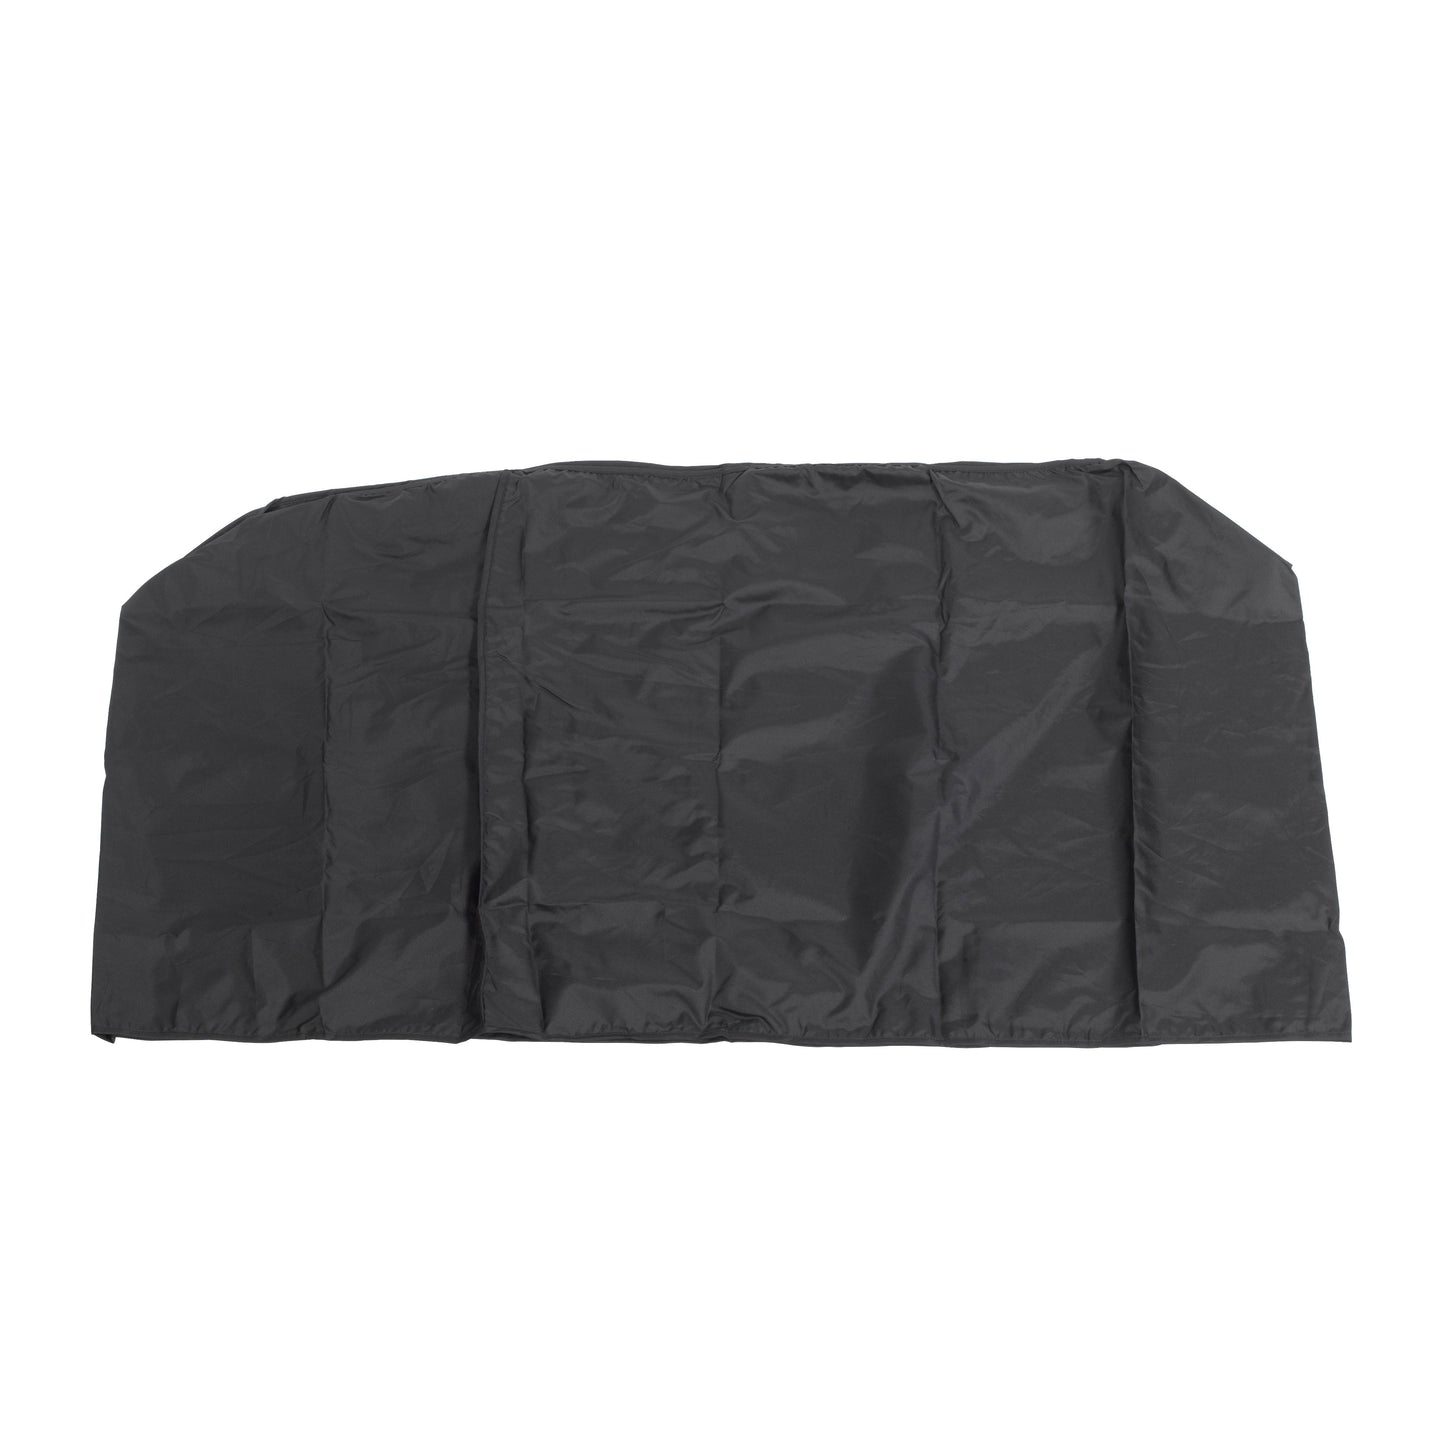 Drive Medical az1000 Power Scooter Cover for use with Bobcat, Dart, Phoenix